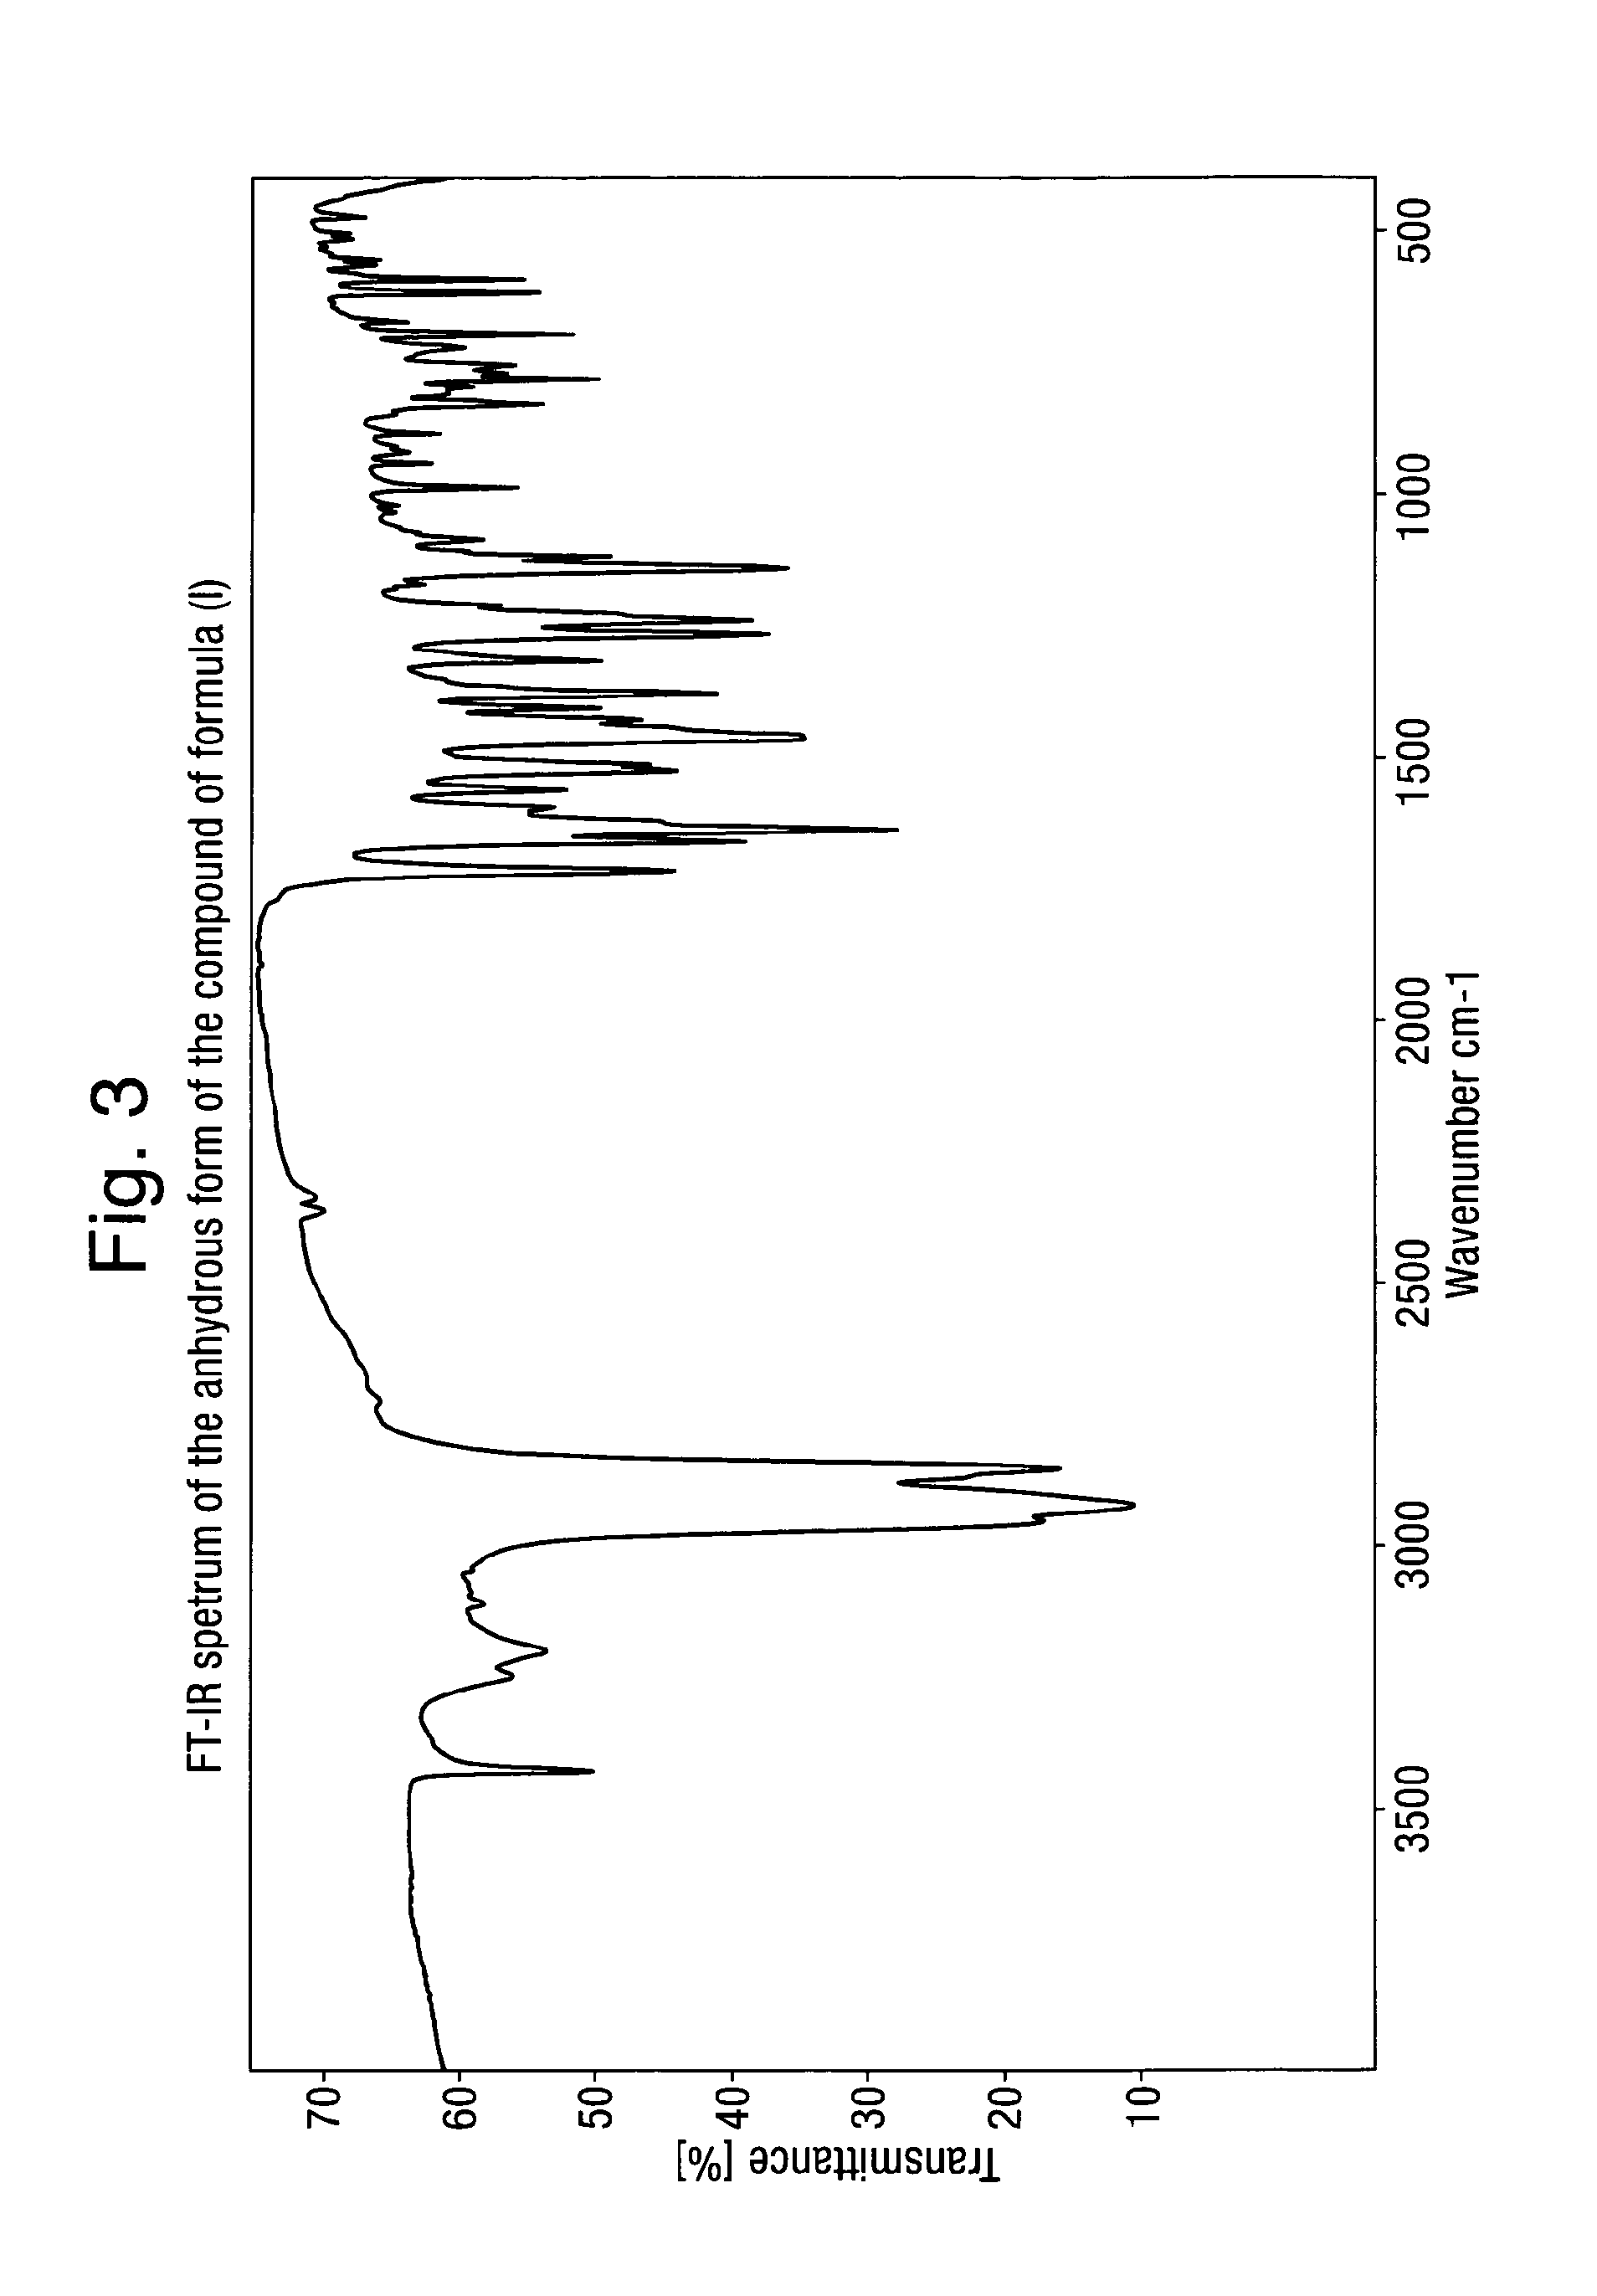 Pharmaceutical compositions, dosage forms and new forms of the compound of formula (I), and methods of use thereof